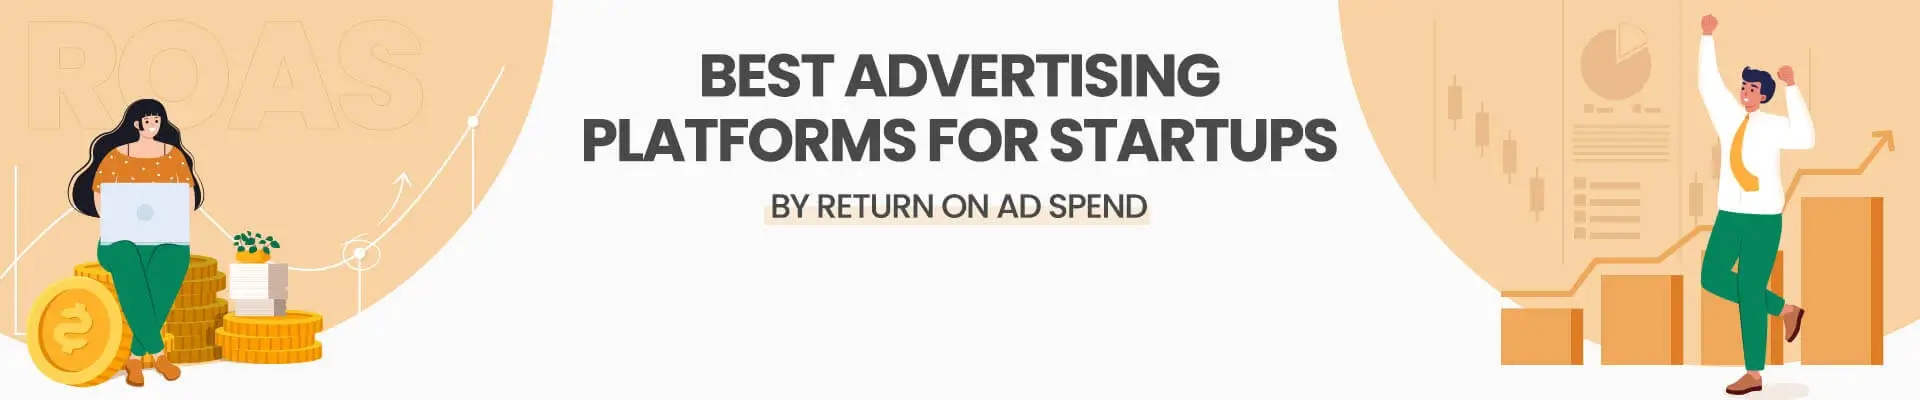 Advertising Platforms for Startups by Return on Ad Spend